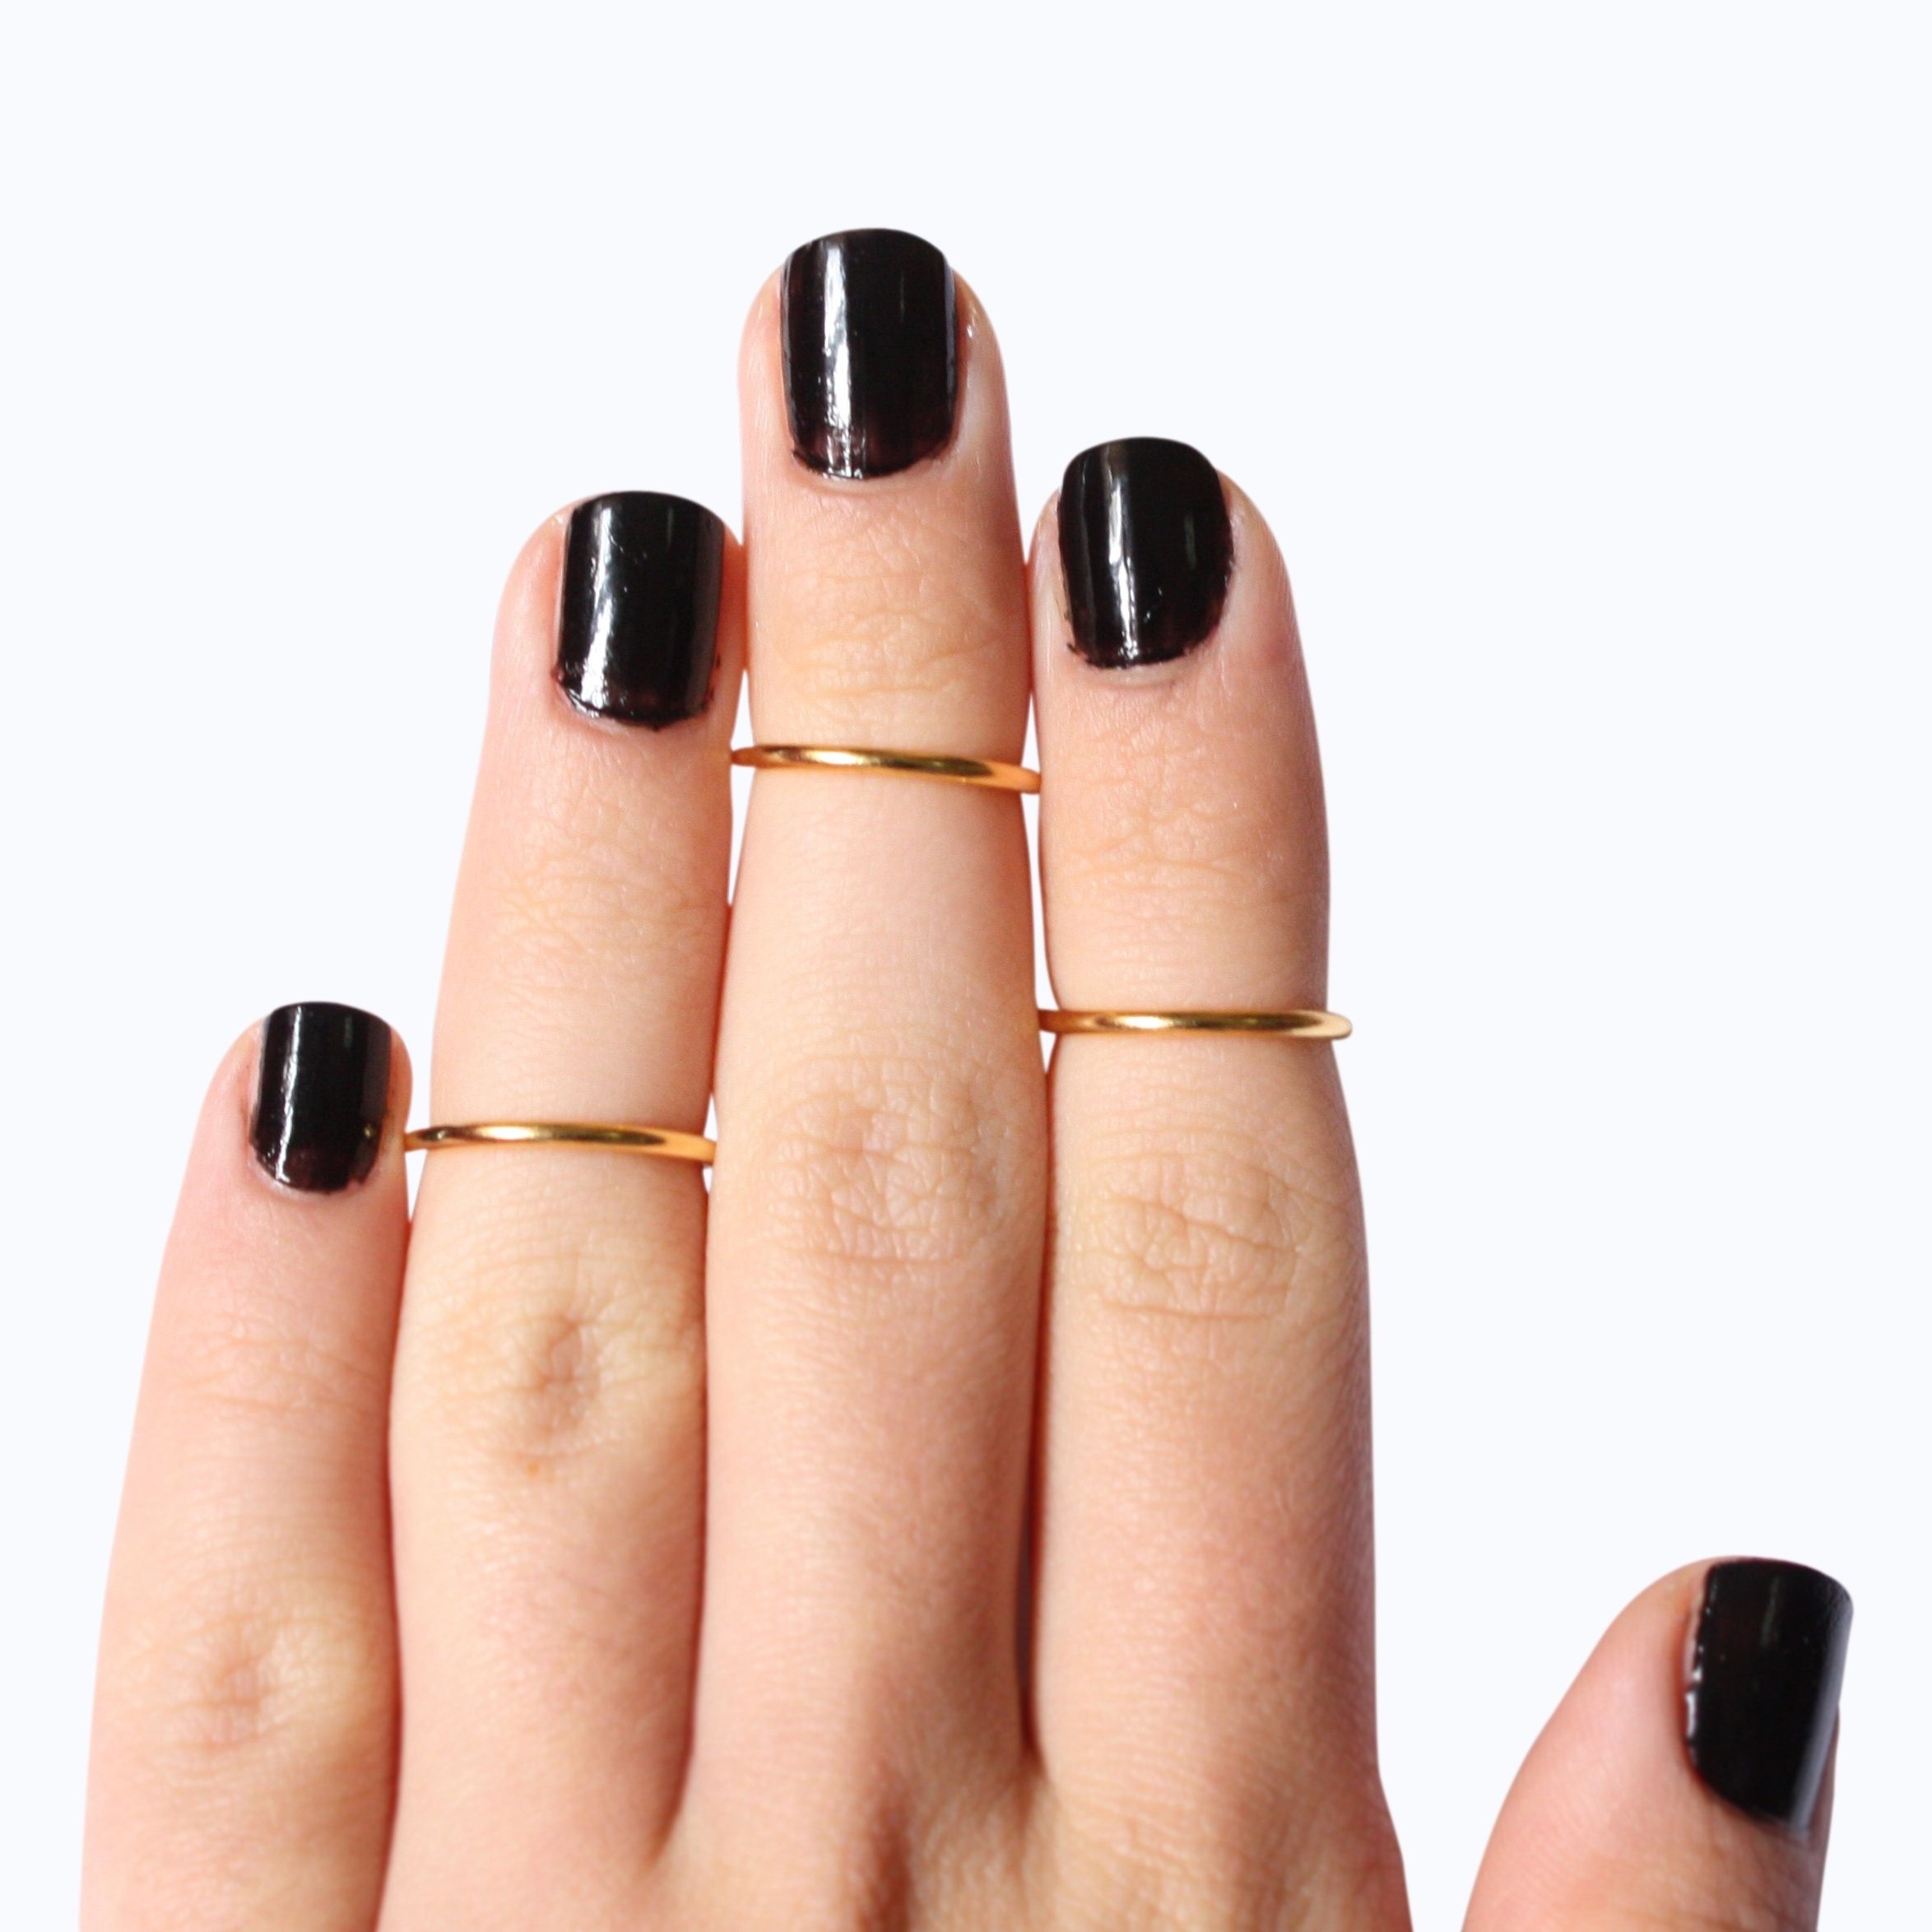 Gold Toe Rings | Midi Rings Within Latest 14k Gold Toe Rings (View 2 of 25)